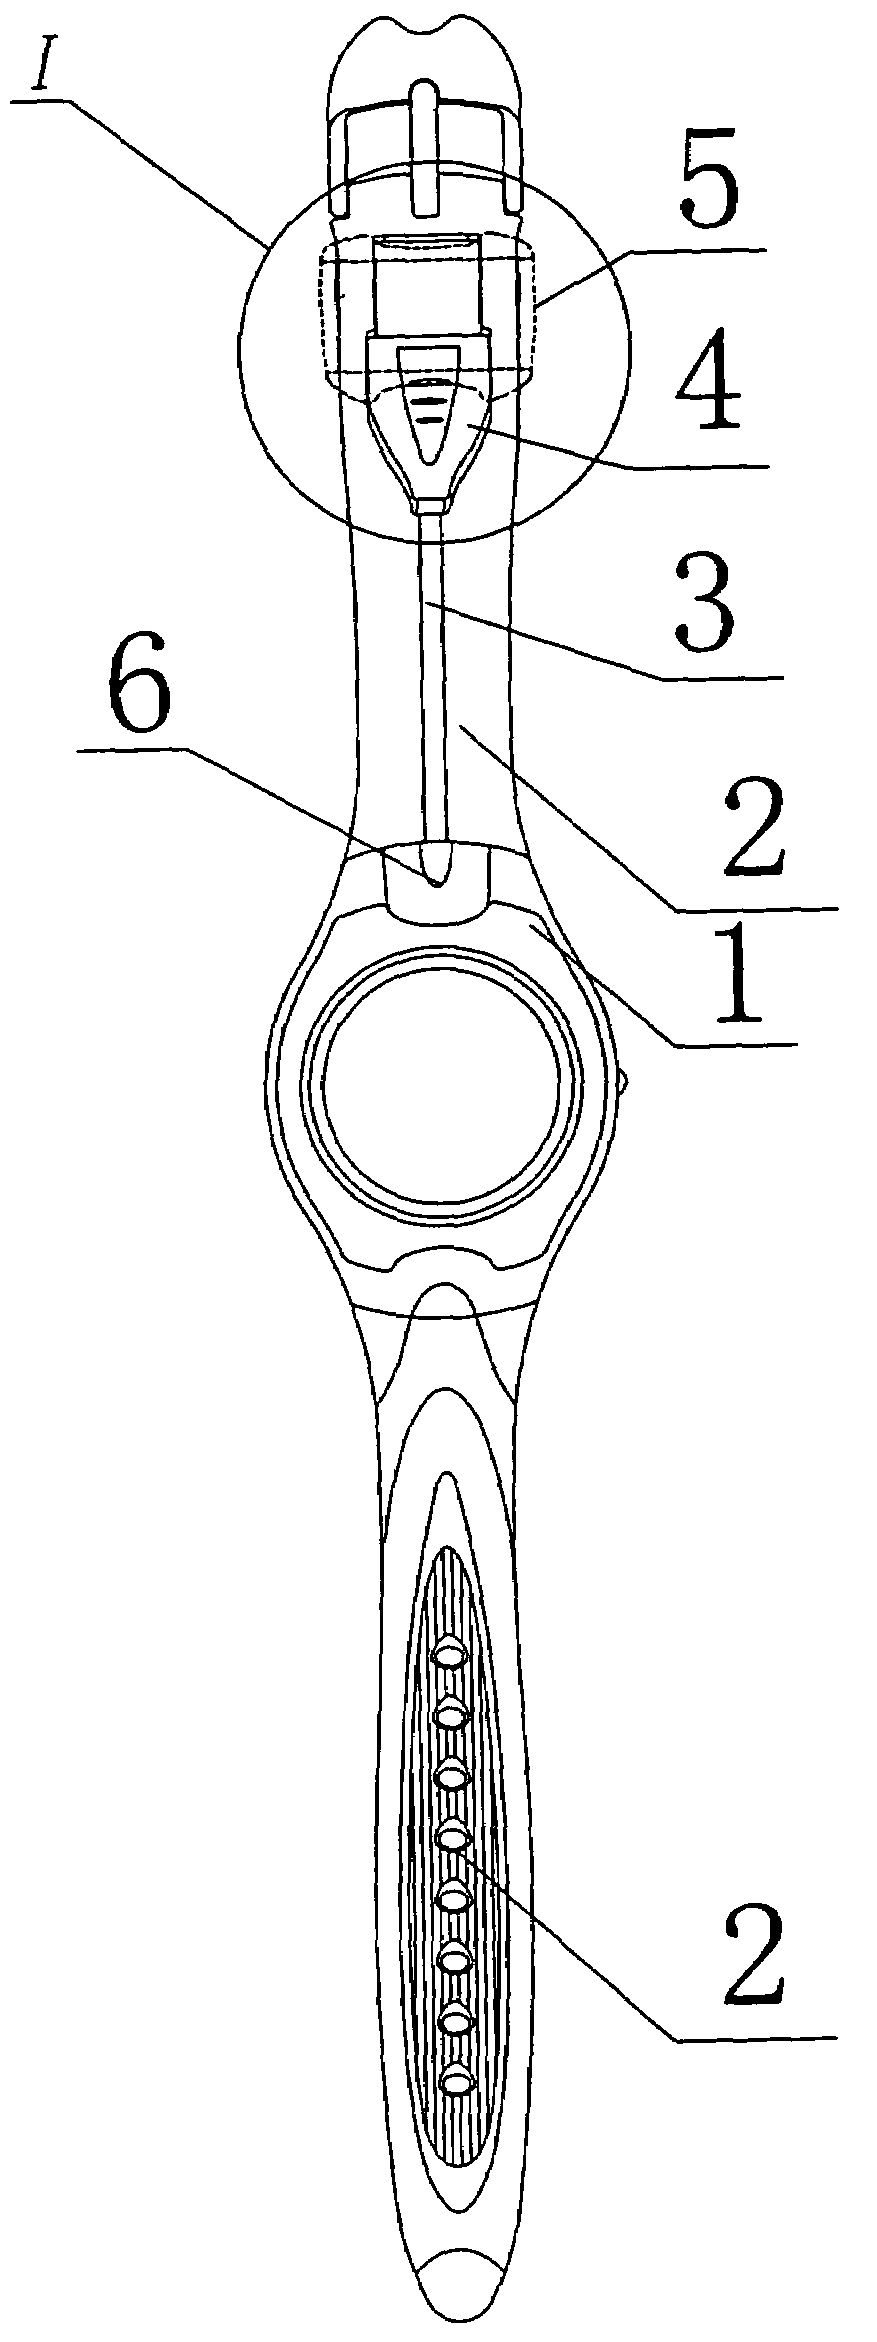 Wristwatch capable of storing and transmitting data